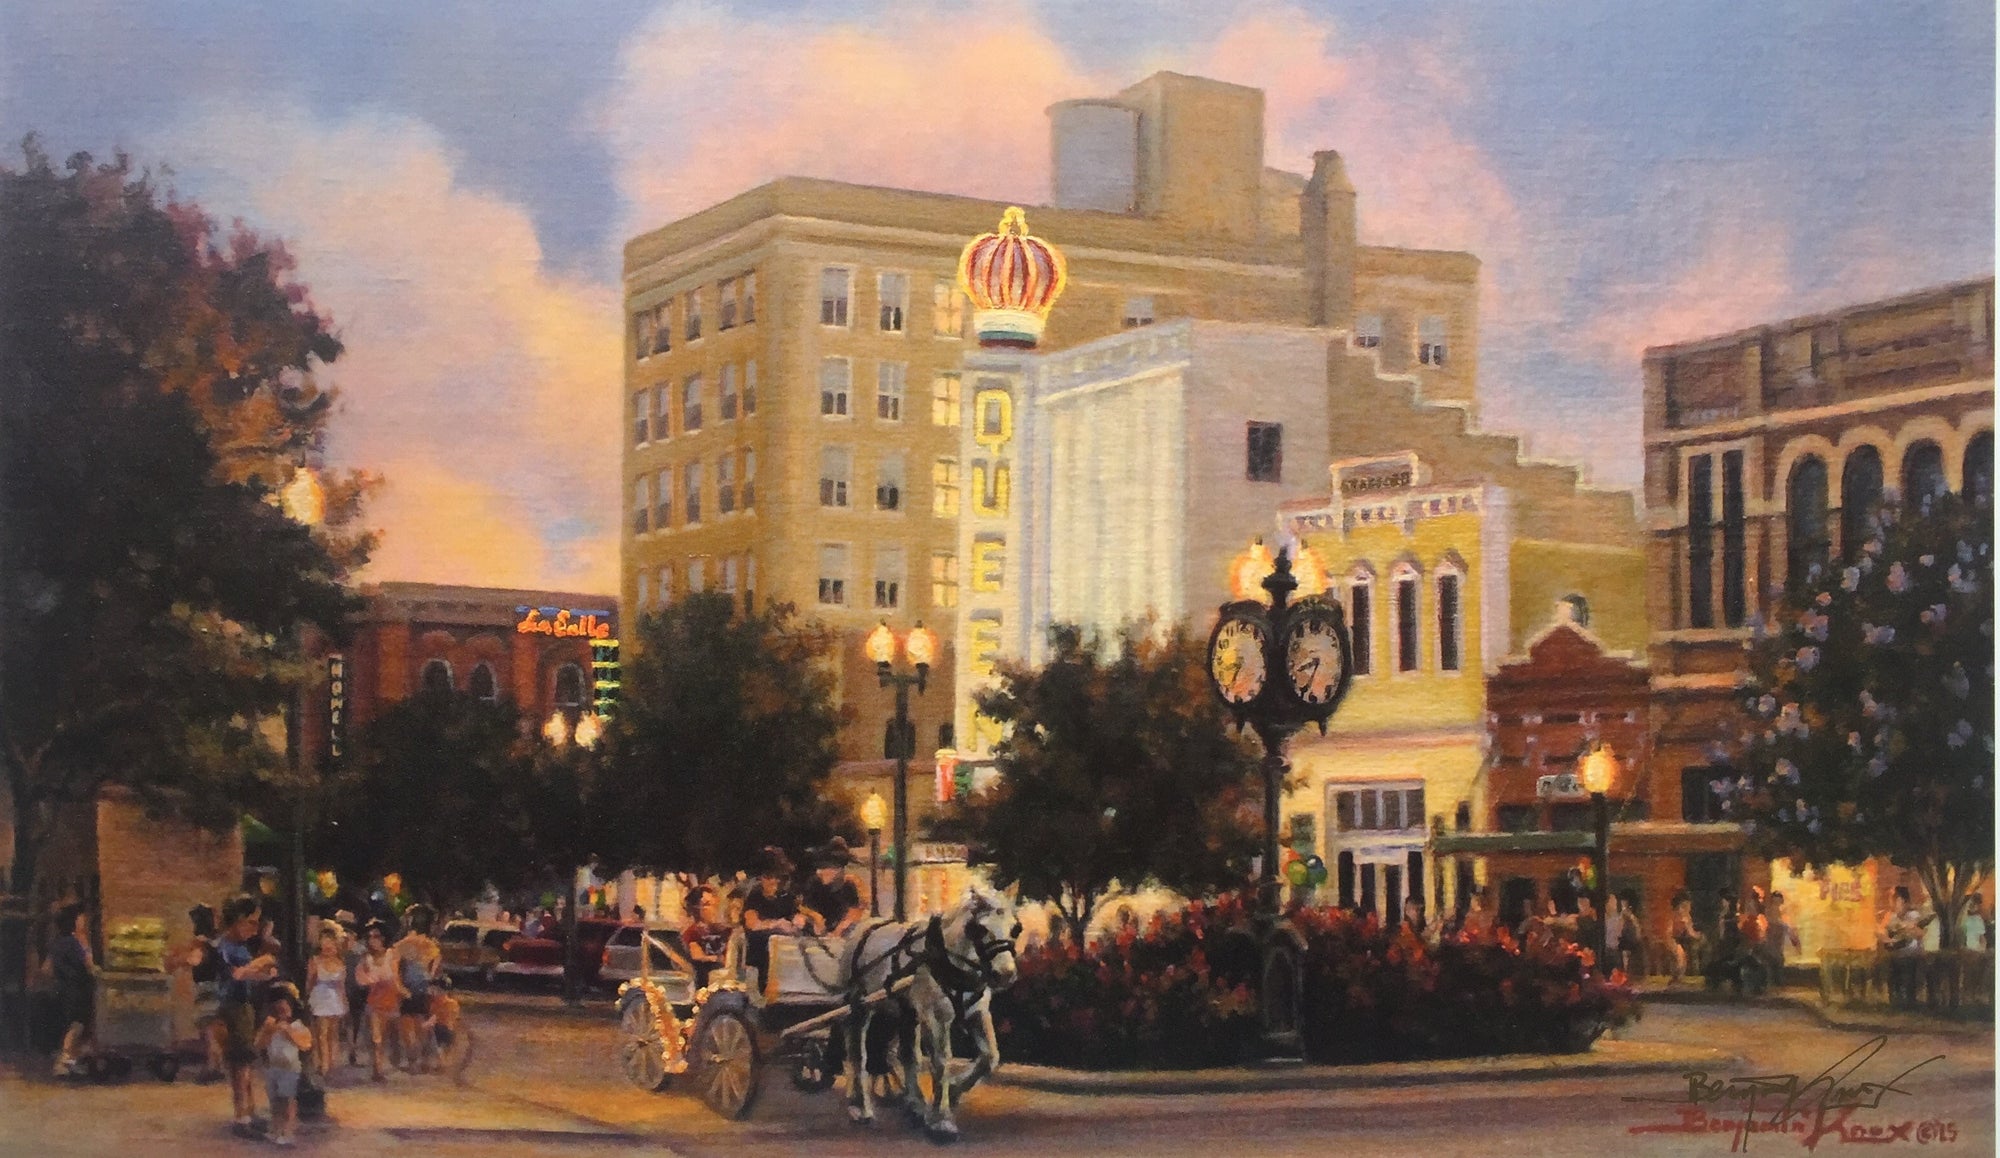 First Friday in Downtown Bryan - Print - Benjamin Knox Fine Art Gallery